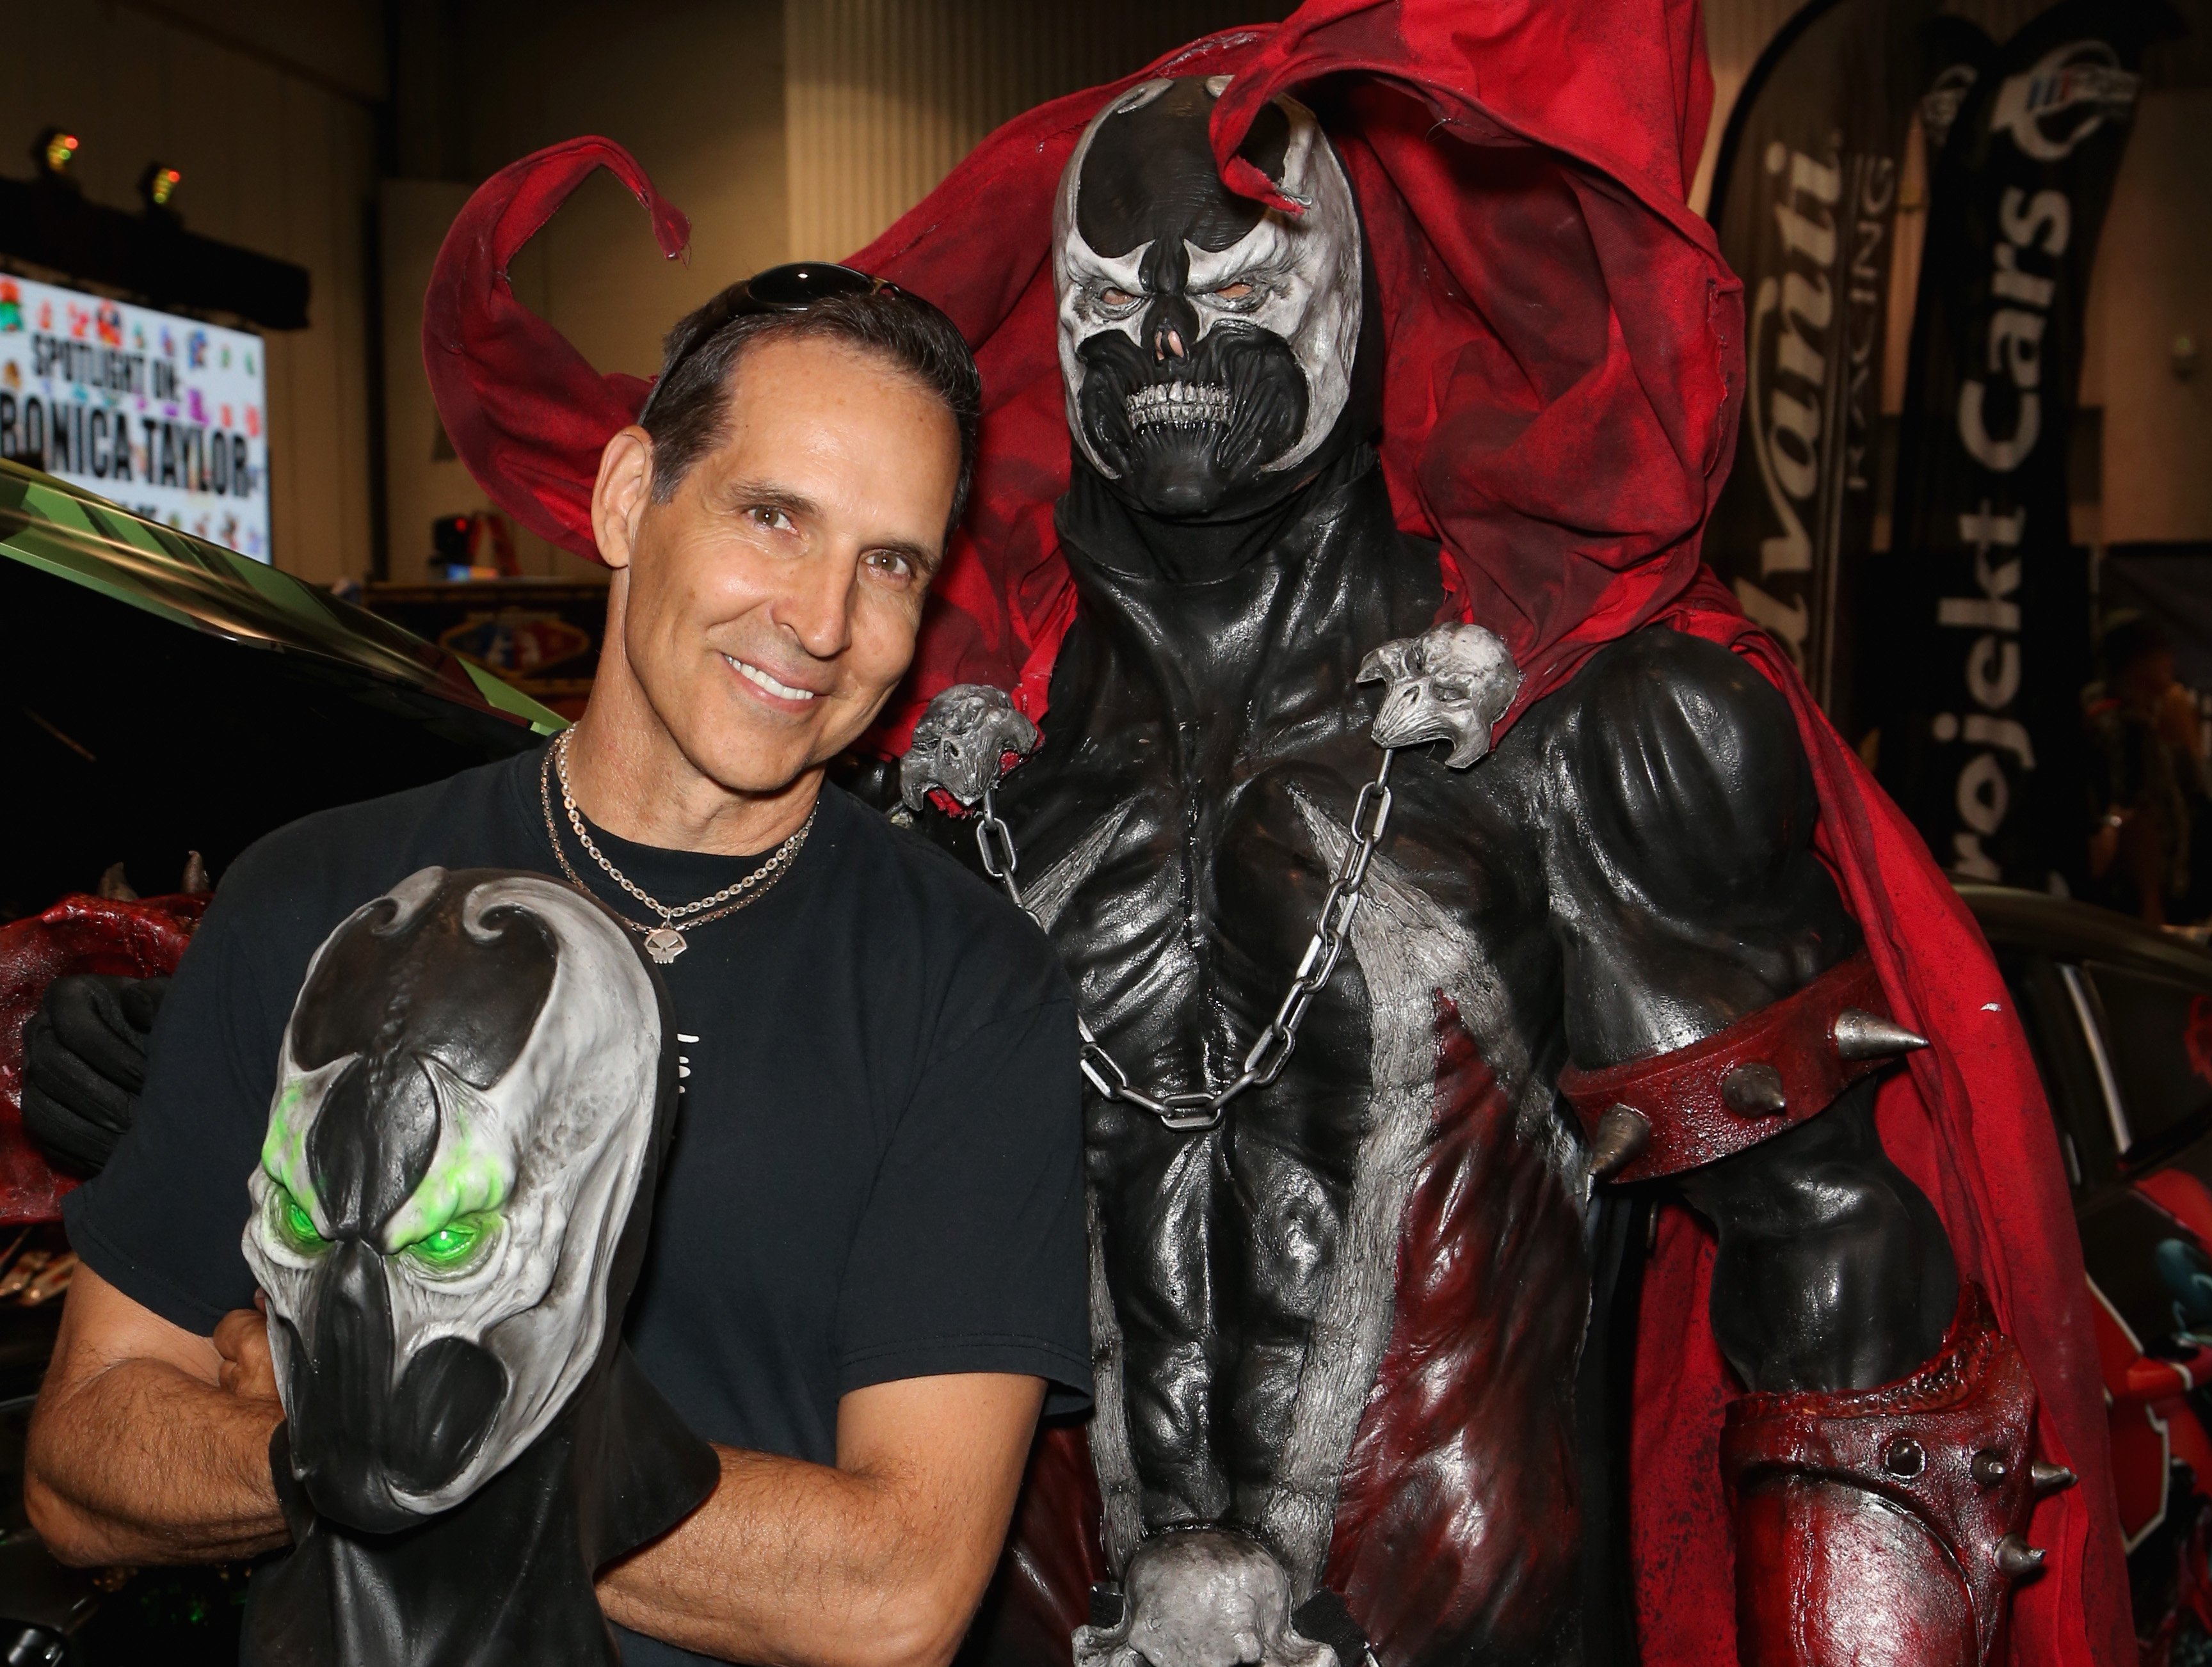 Todd McFarlane 'Spawn' standing next to Tom Proprofsky, dressed as the character Spawn